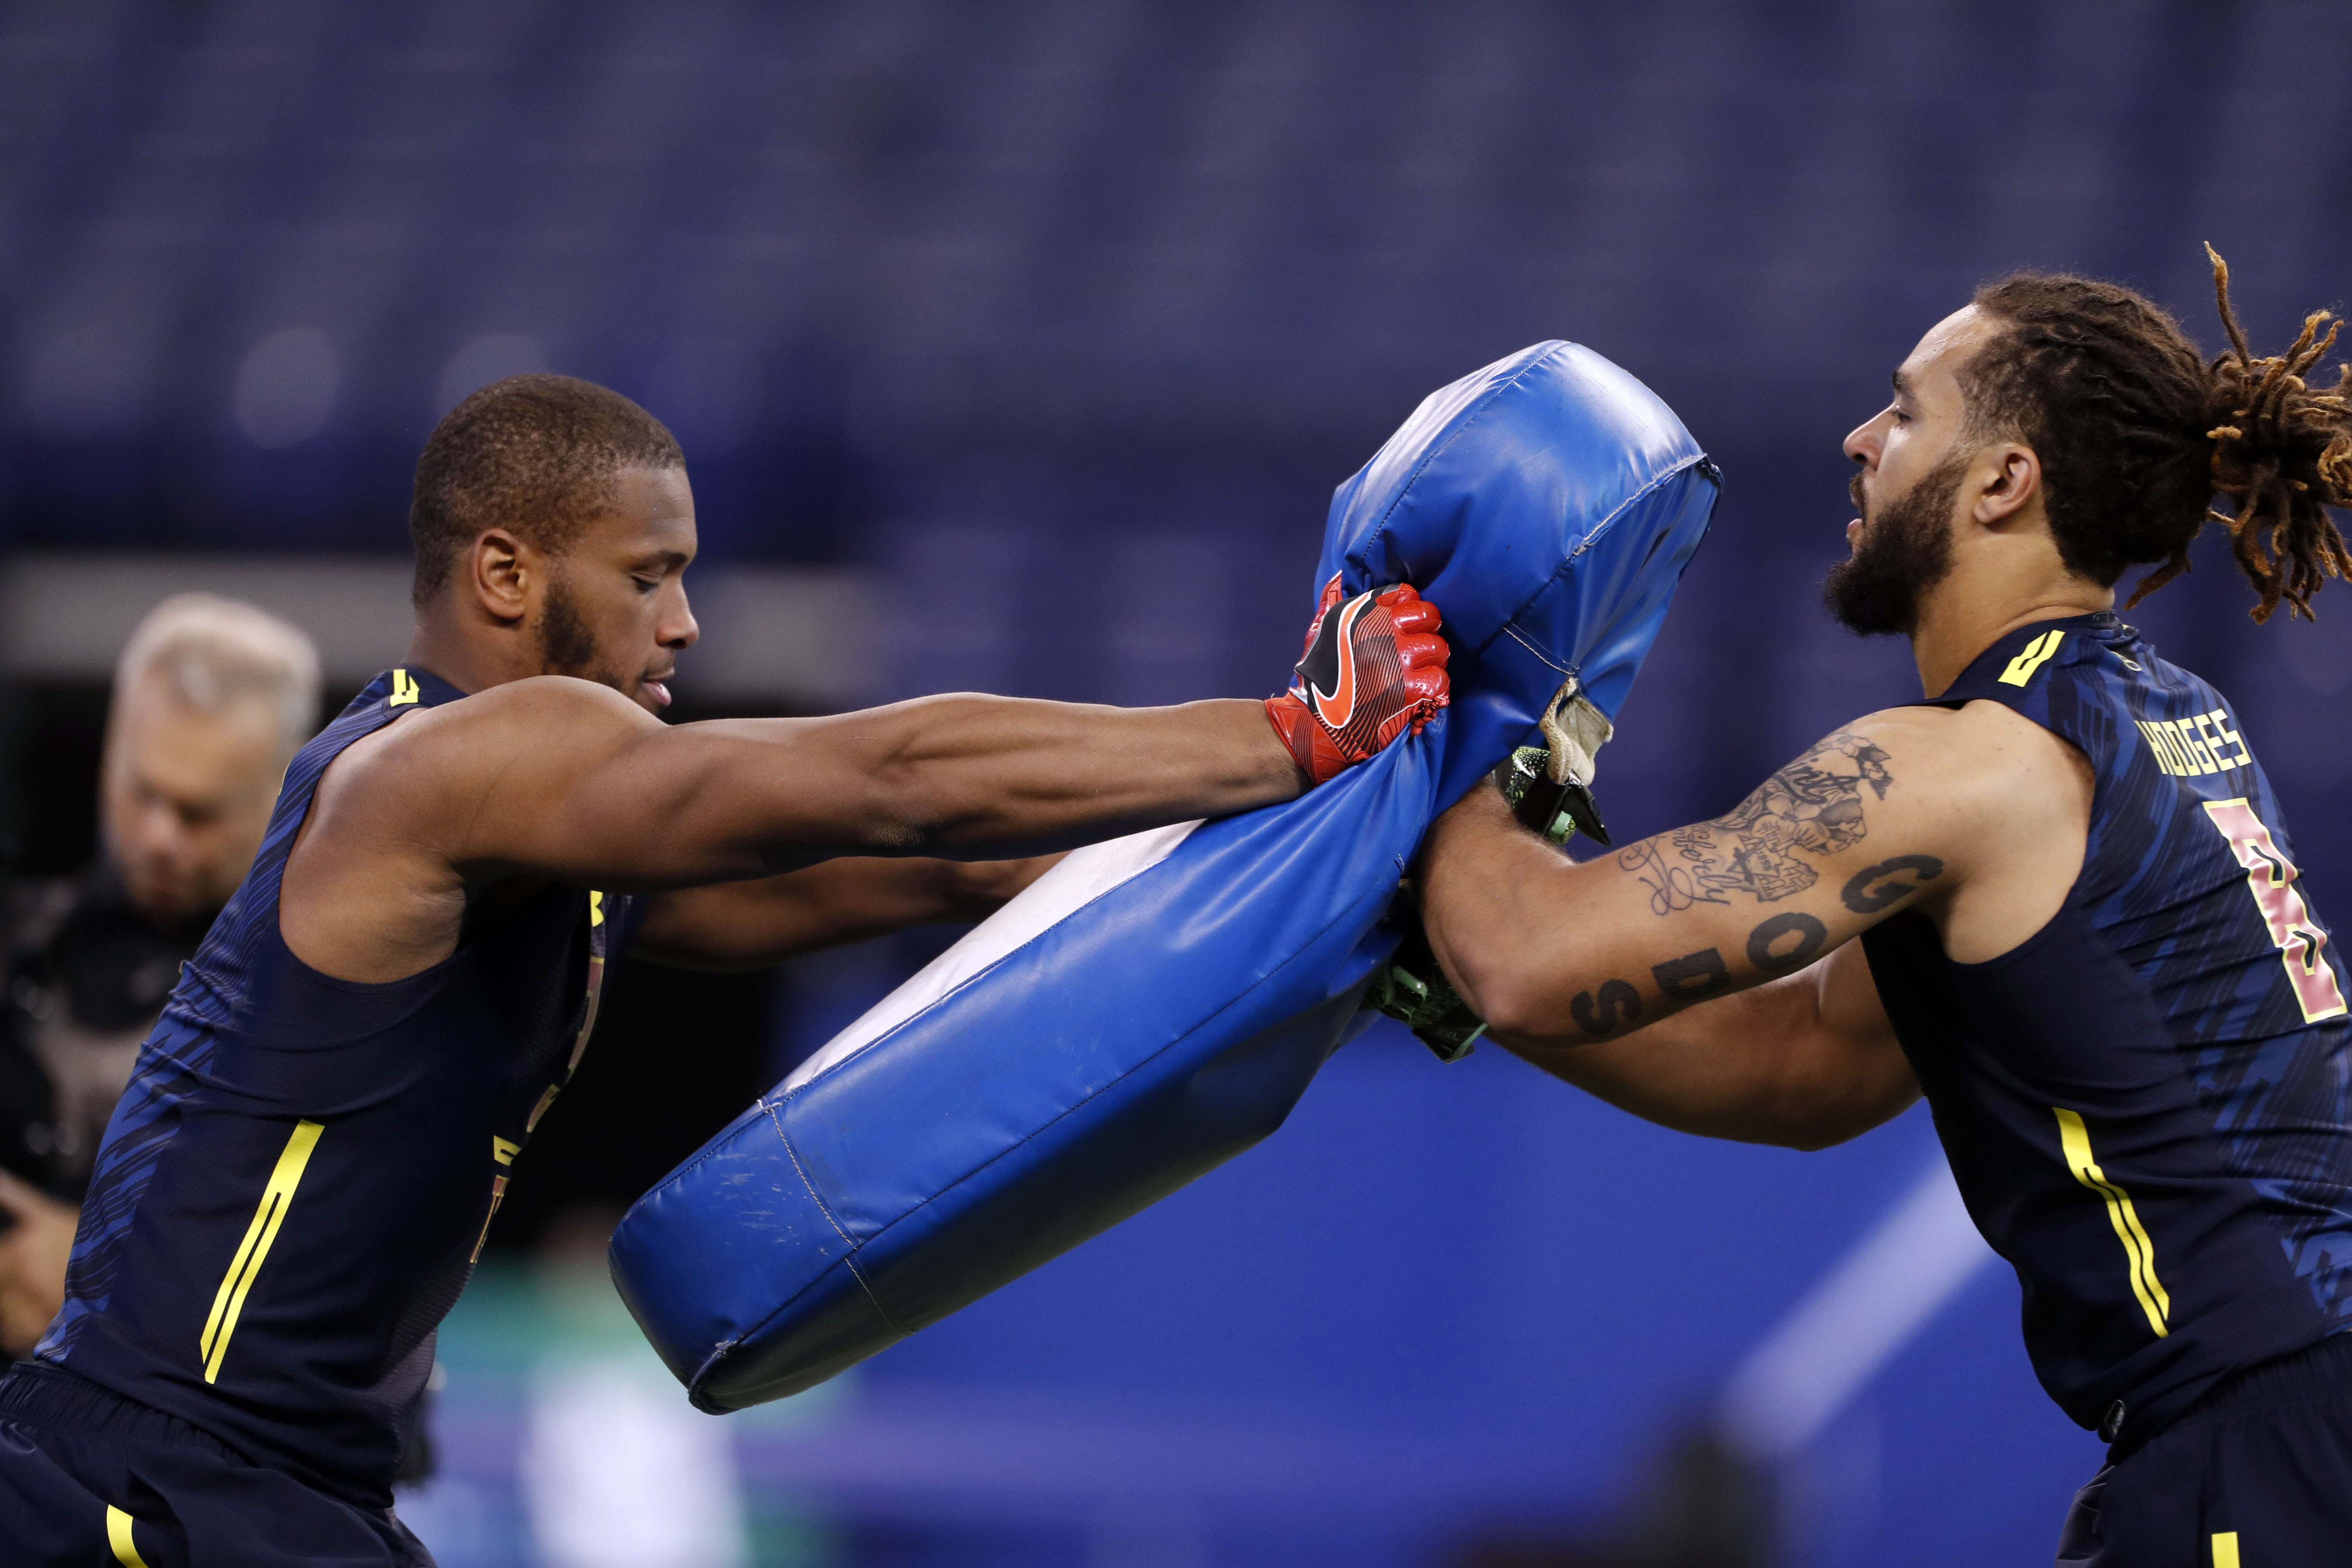 INDIANAPOLIS, IN - Tight end prospects for the 2017 NFL Draft go through bag drills together in front of NFL teams at the 2017 NFL Scouting Combine at Lucas Oil Stadium.